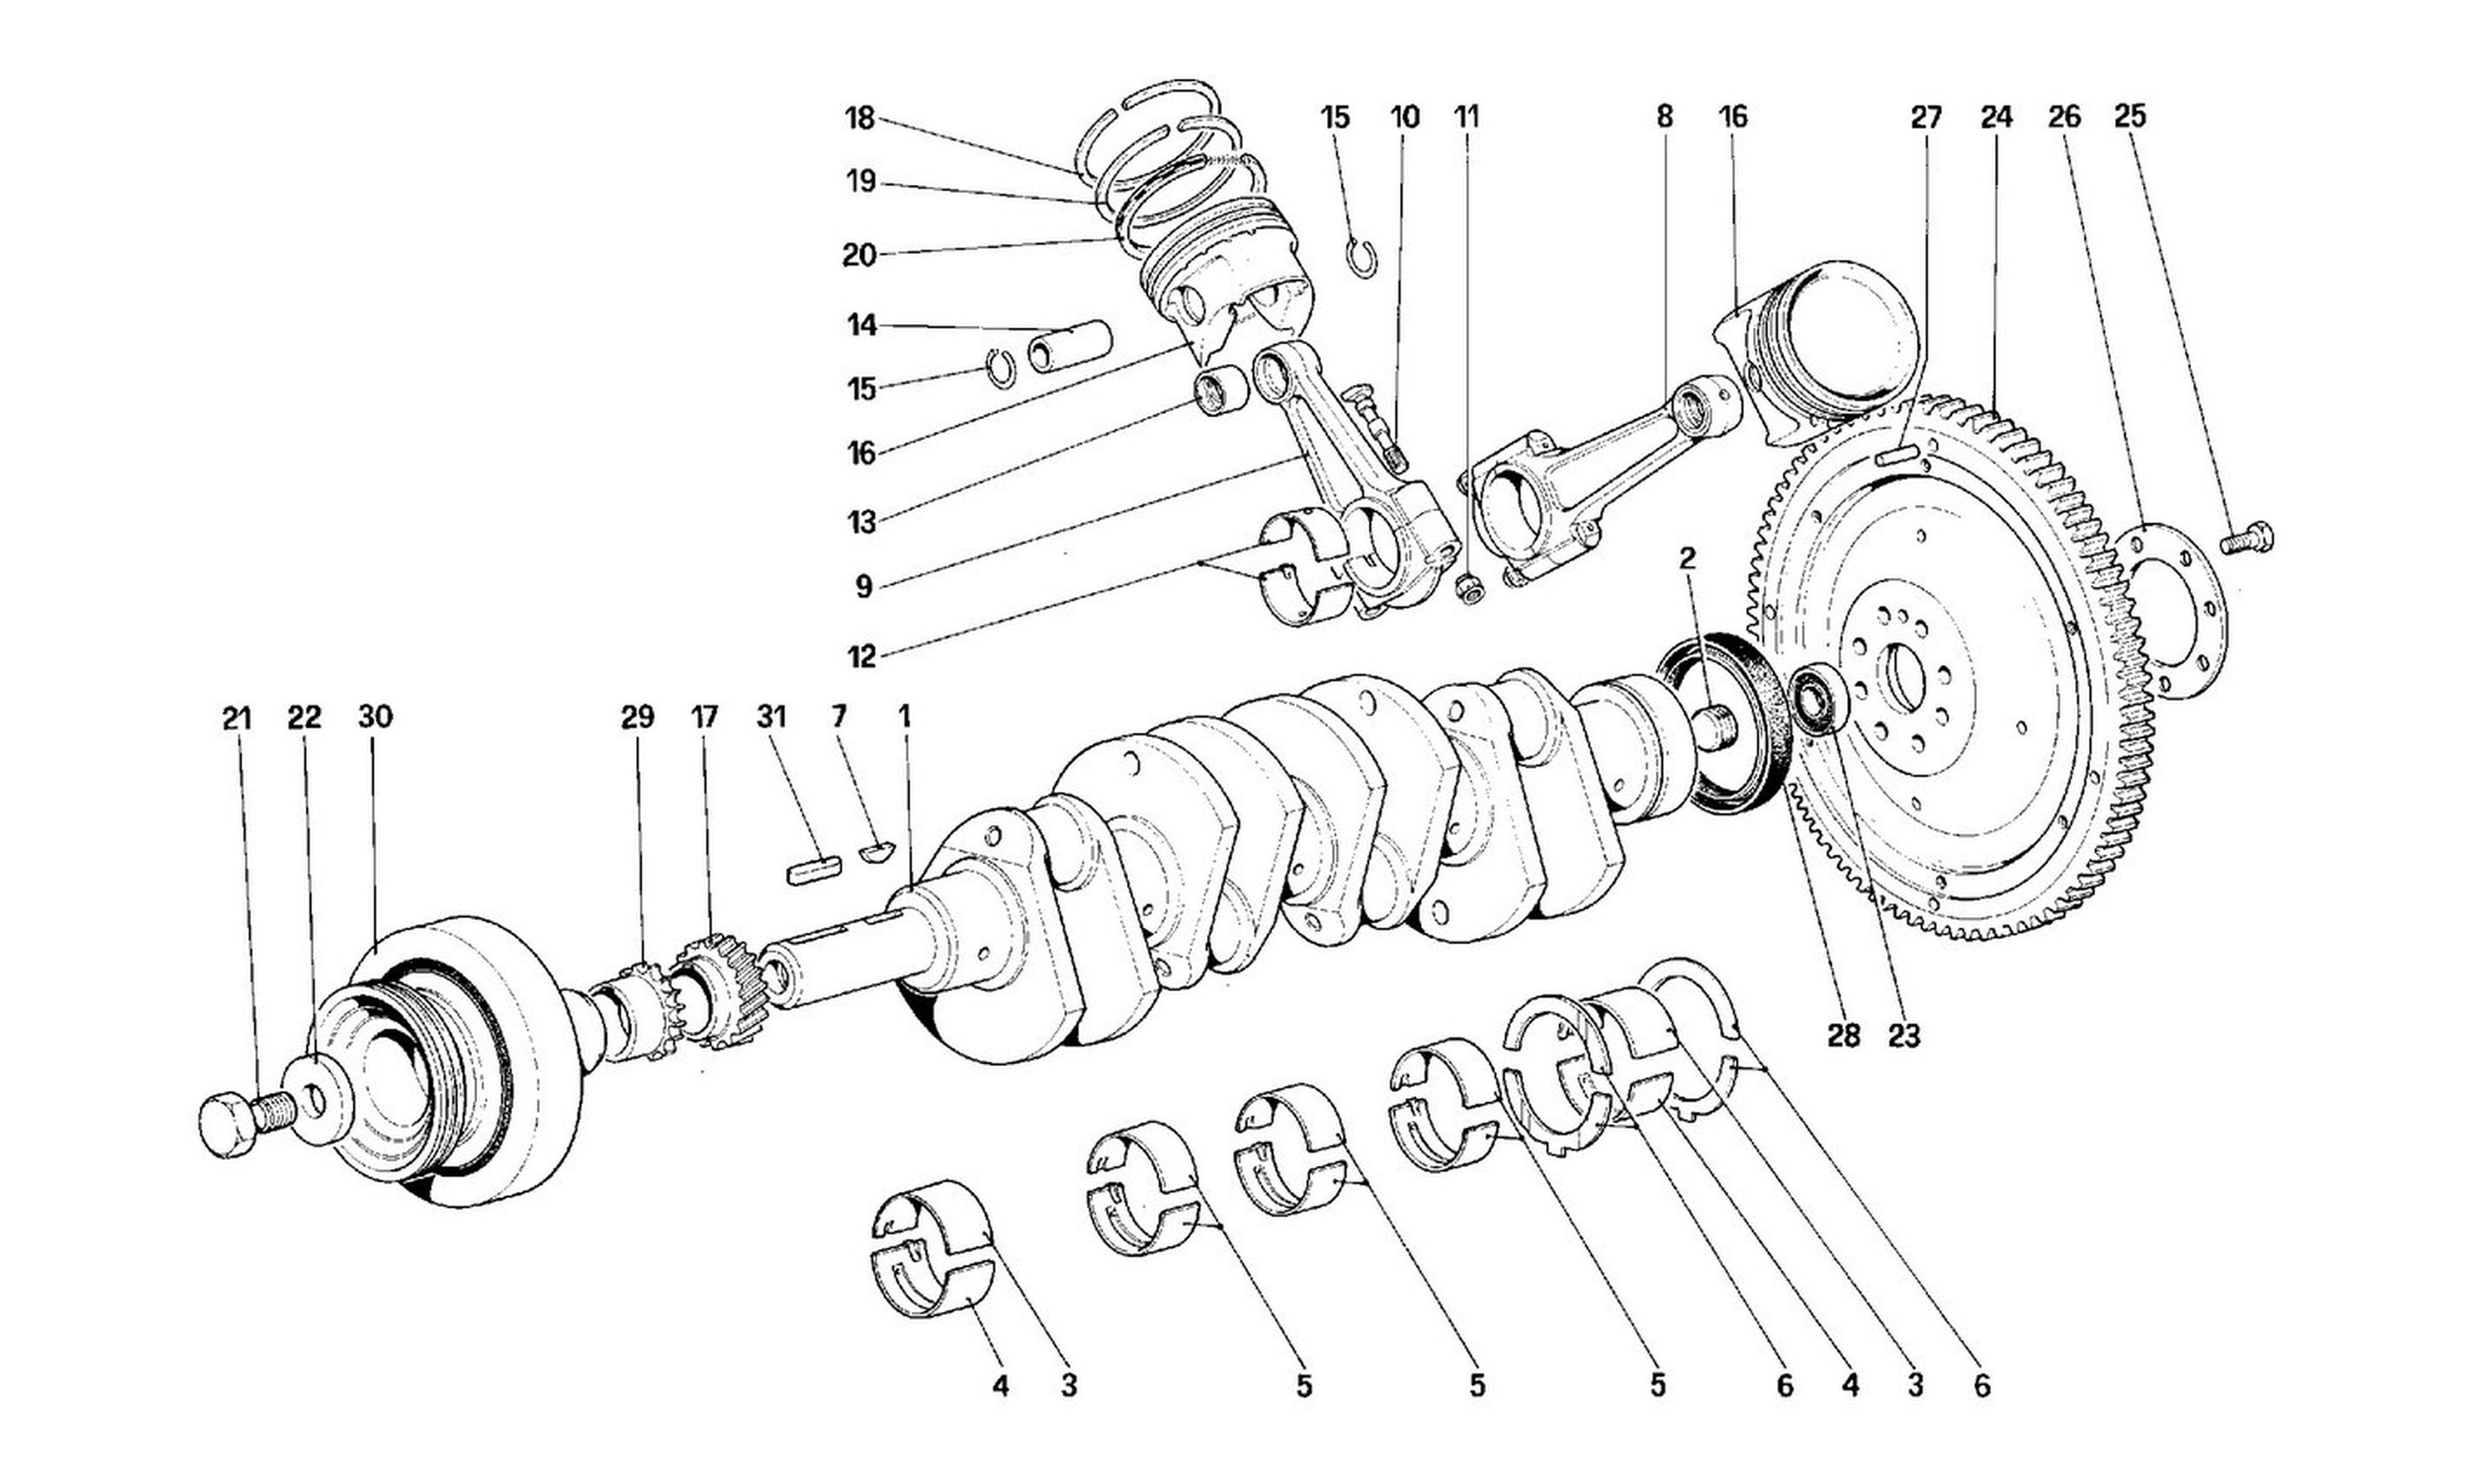 Schematic: Driving Shaft - Connecting Rods And Pistons - Motor Flywheel